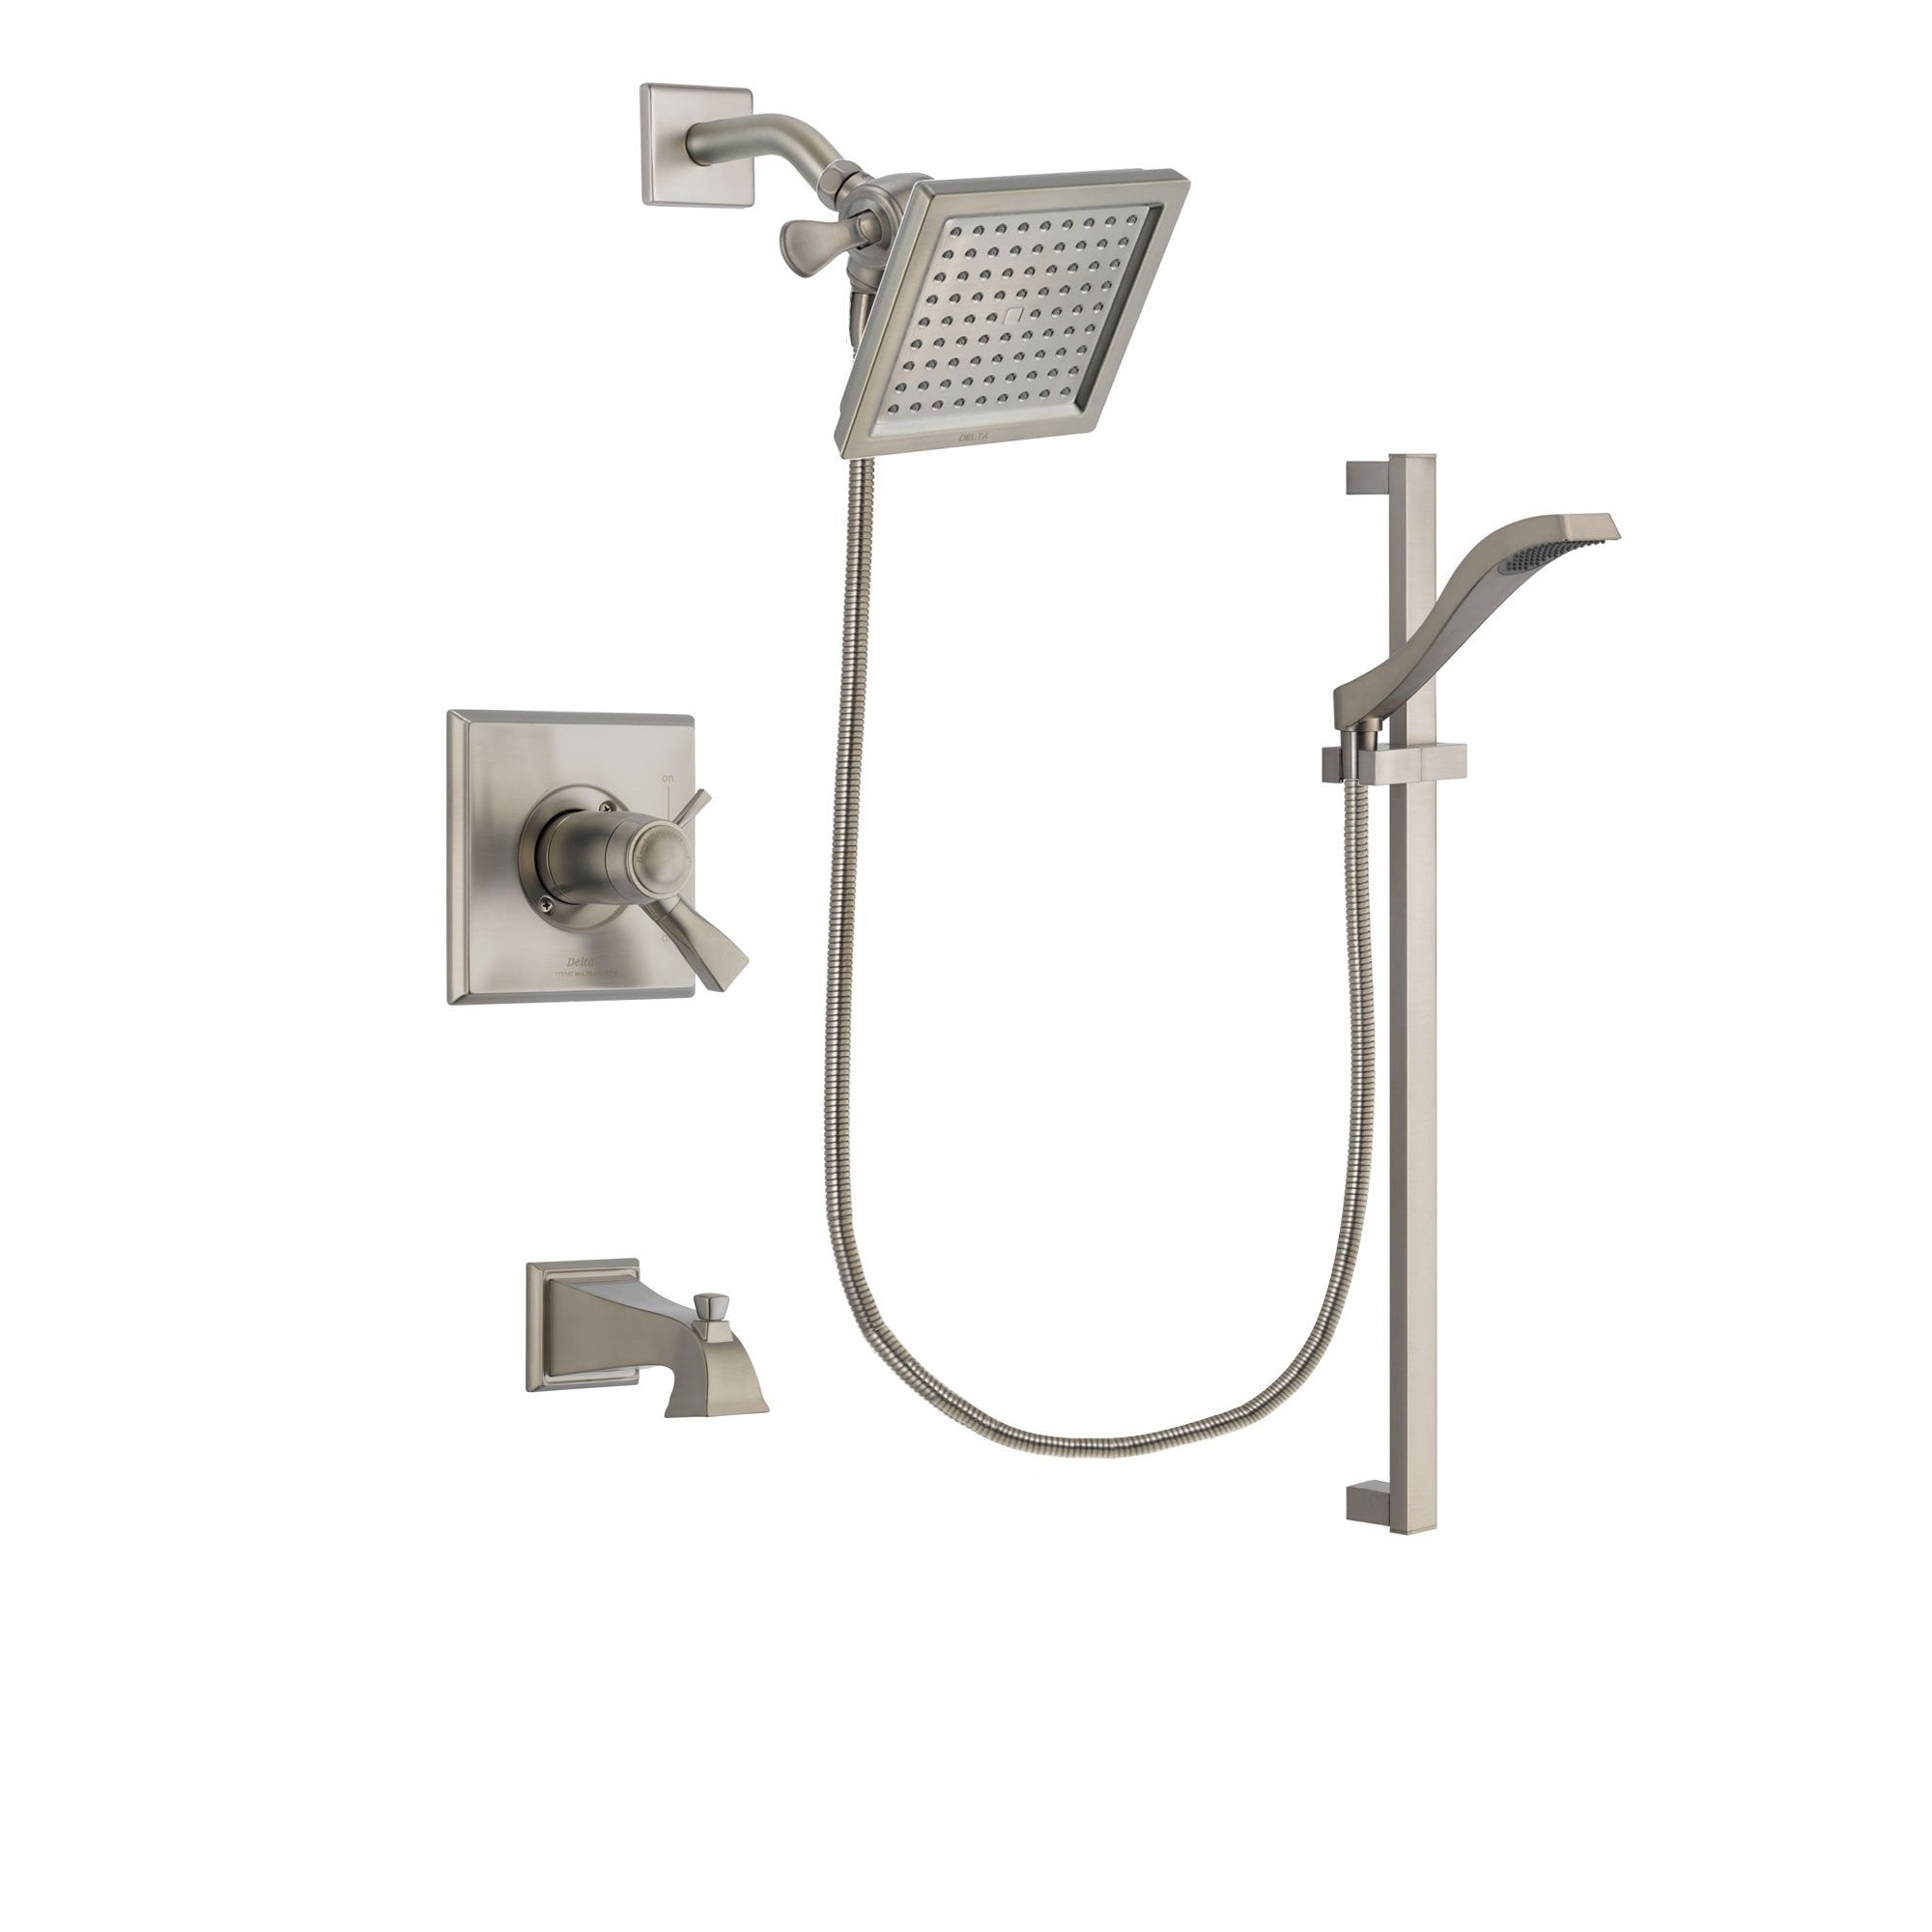 Delta Dryden Stainless Steel Finish Tub and Shower System w/Hand Shower DSP2237V